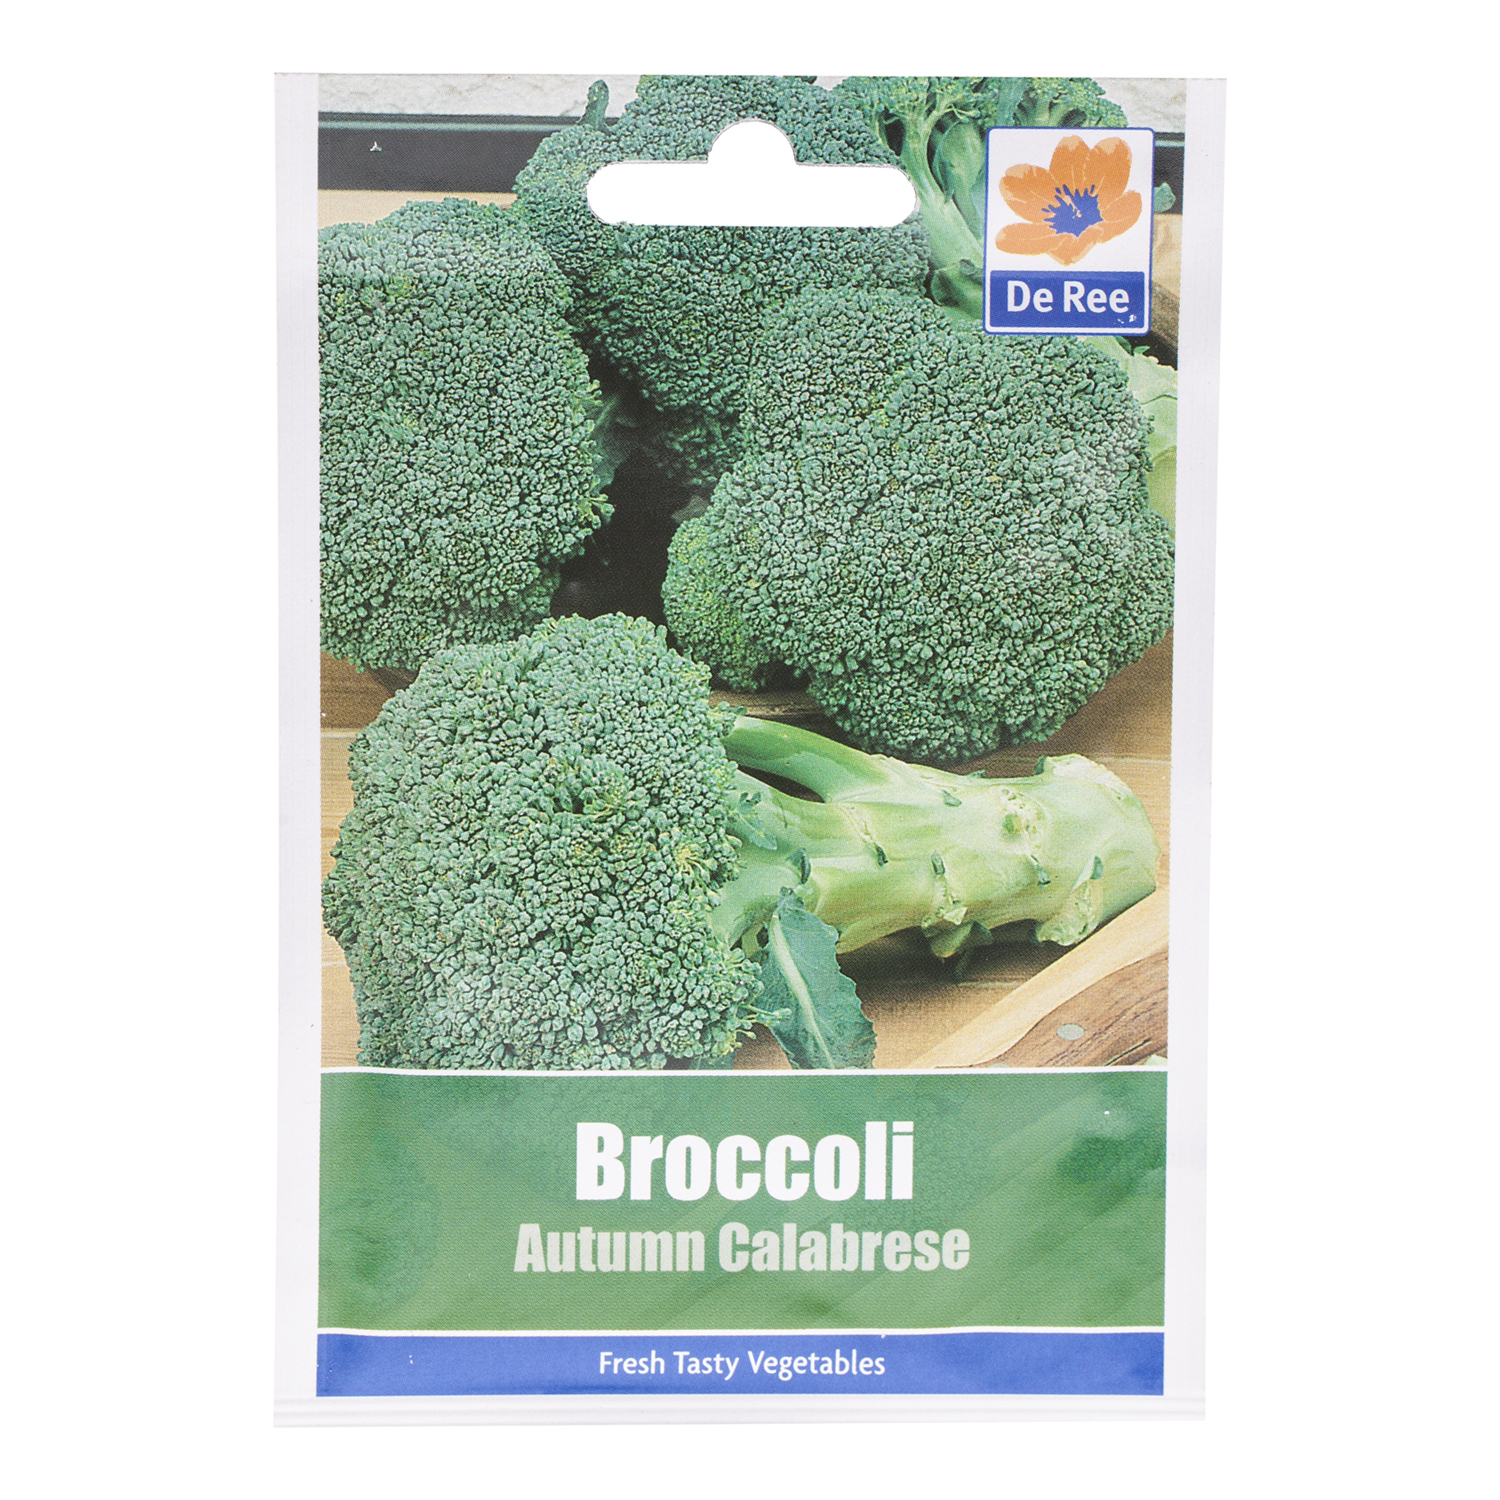 Broccoli Autumn Calabrese Seed Kit Image